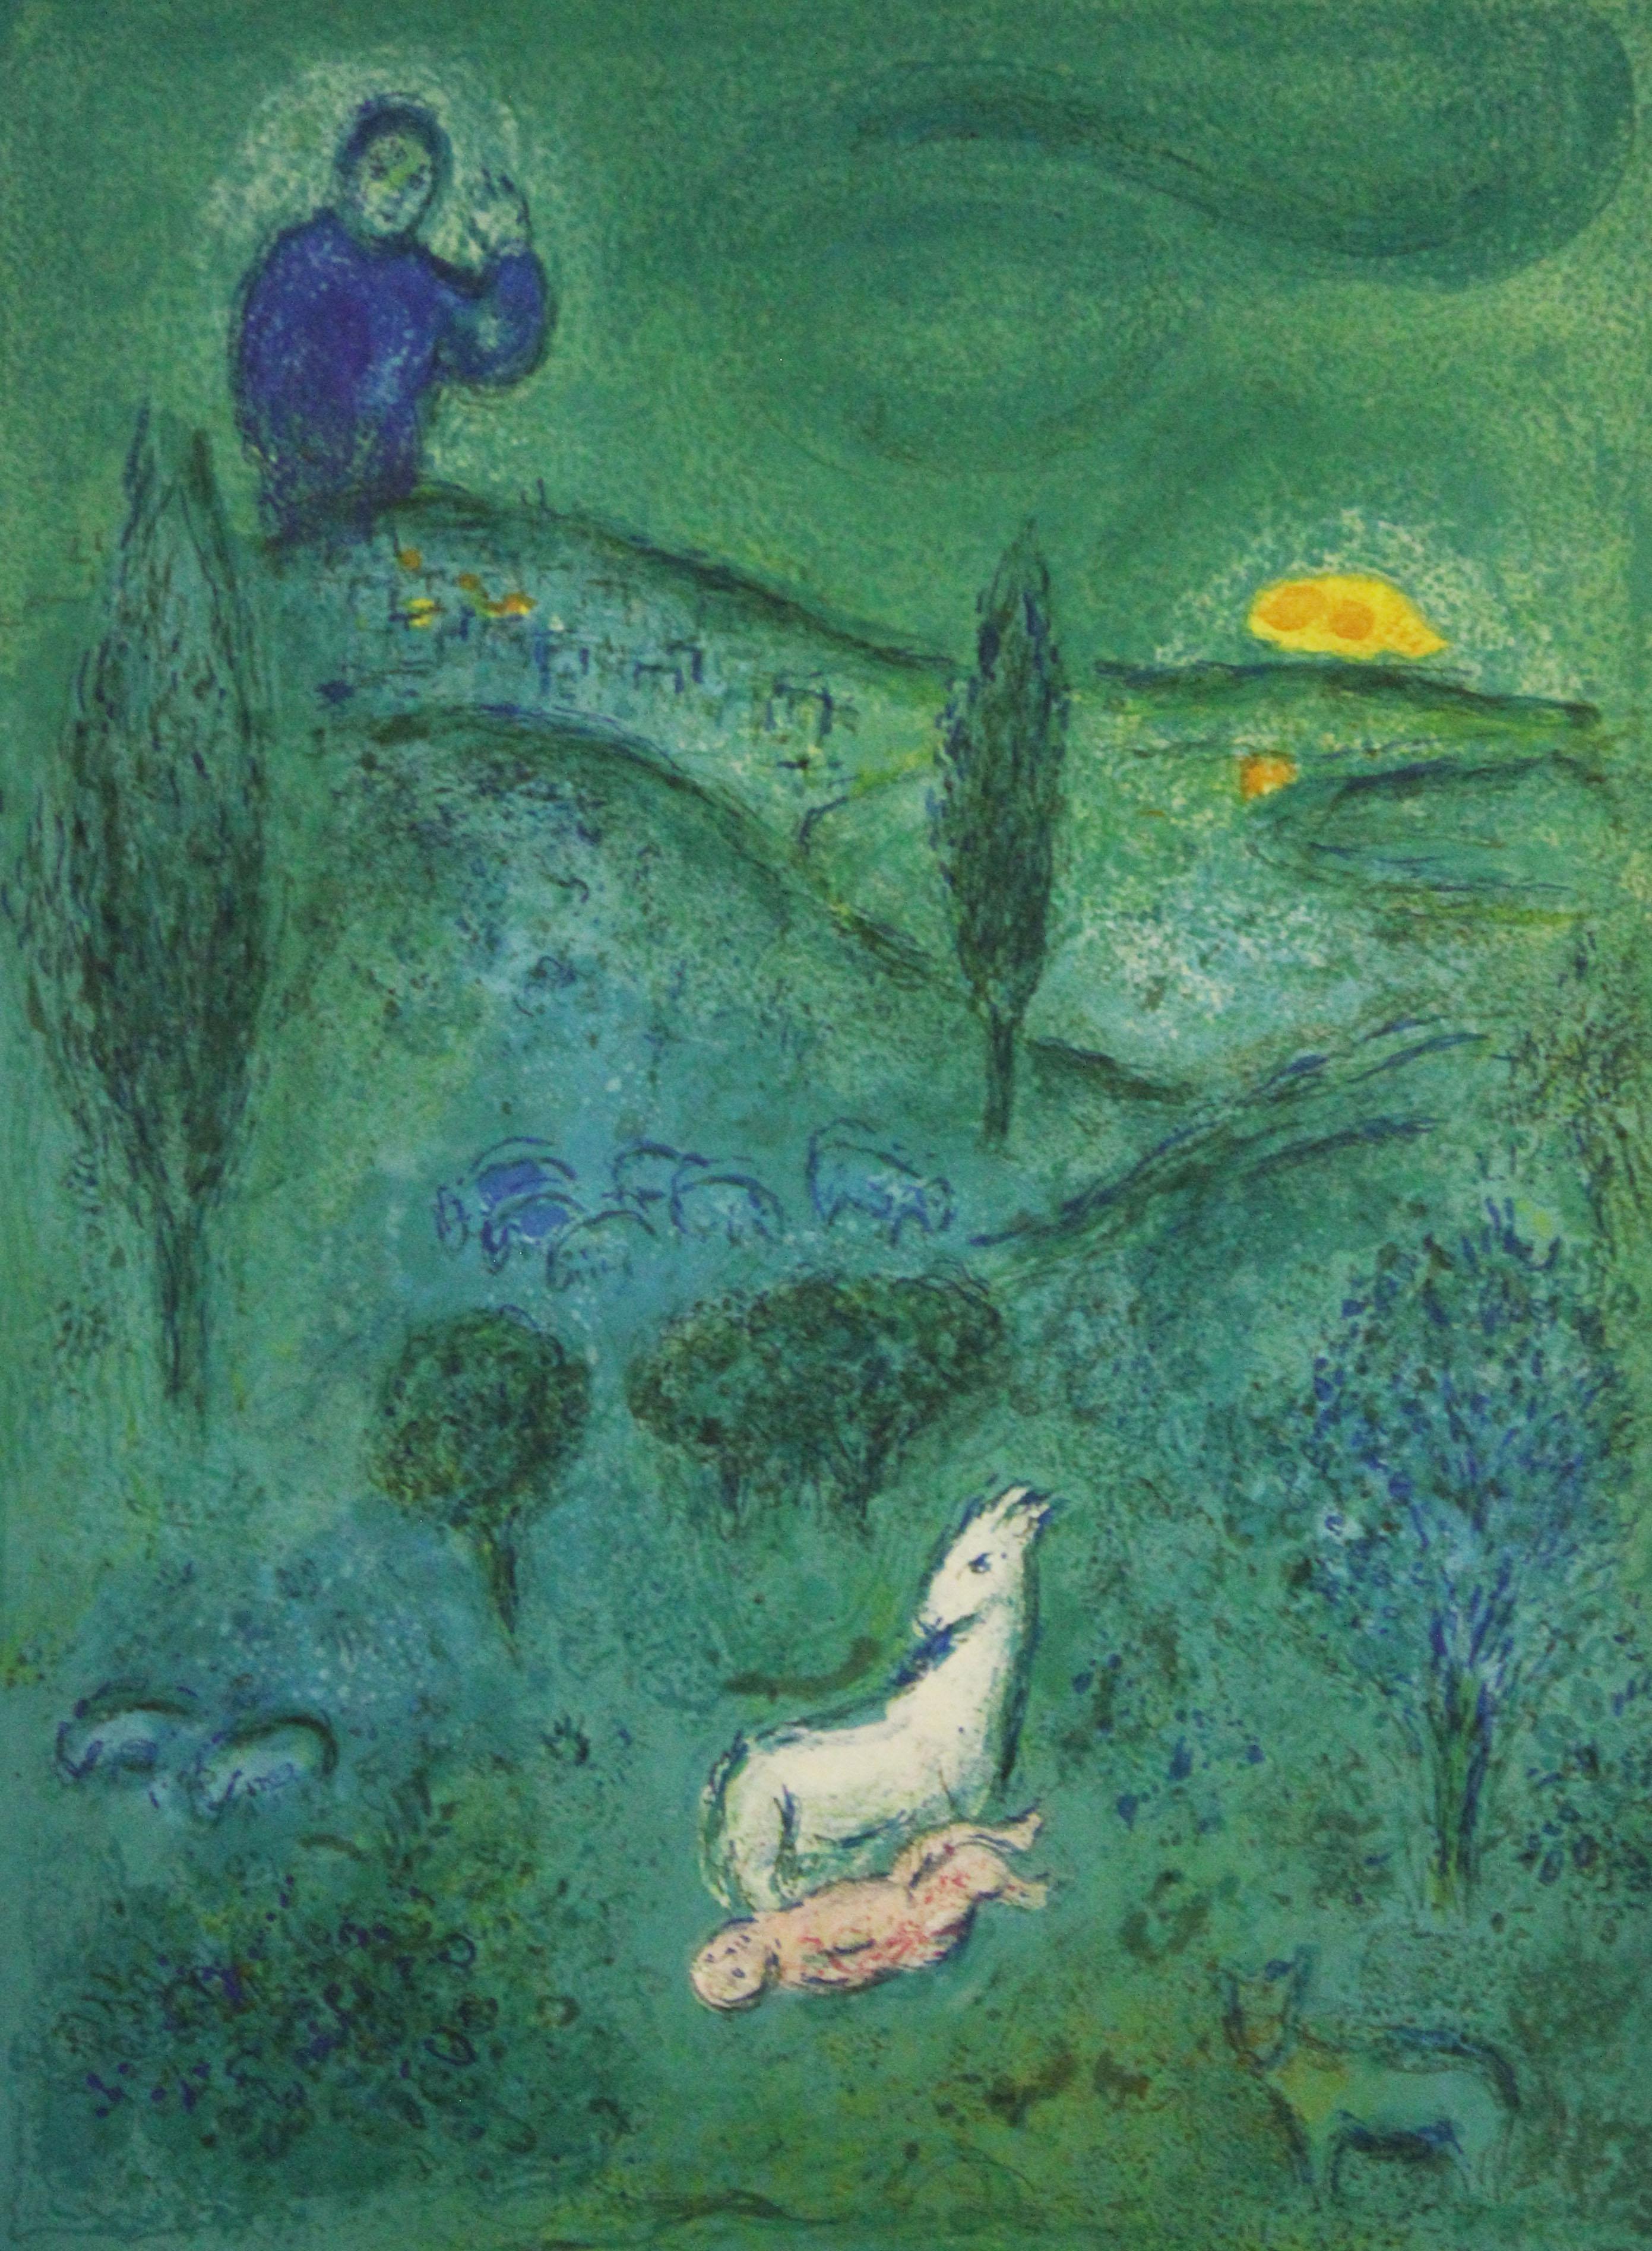 Marc Chagall Print - "Lamon Discovers Daphnis", from the Daphnis and Chloe series, 1961.